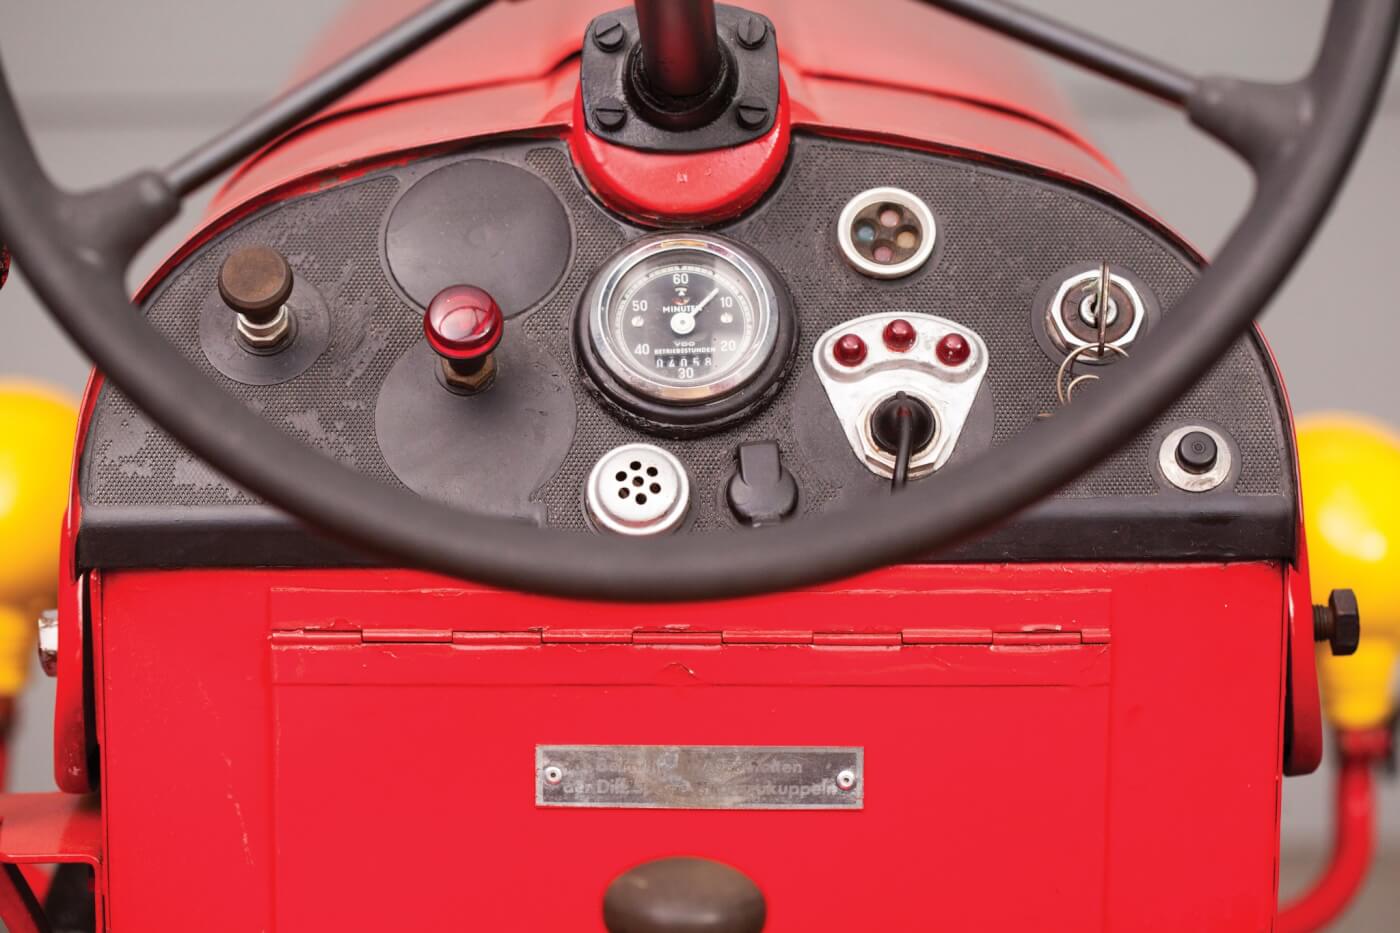 Like many ‘50s tractosr, the dash is typically austere. The horn and turn signal add to the complexity. If the hour meter is original, this tractor only had 4,058 hours at the time of sale. The hinged cover below is a storage compartment.